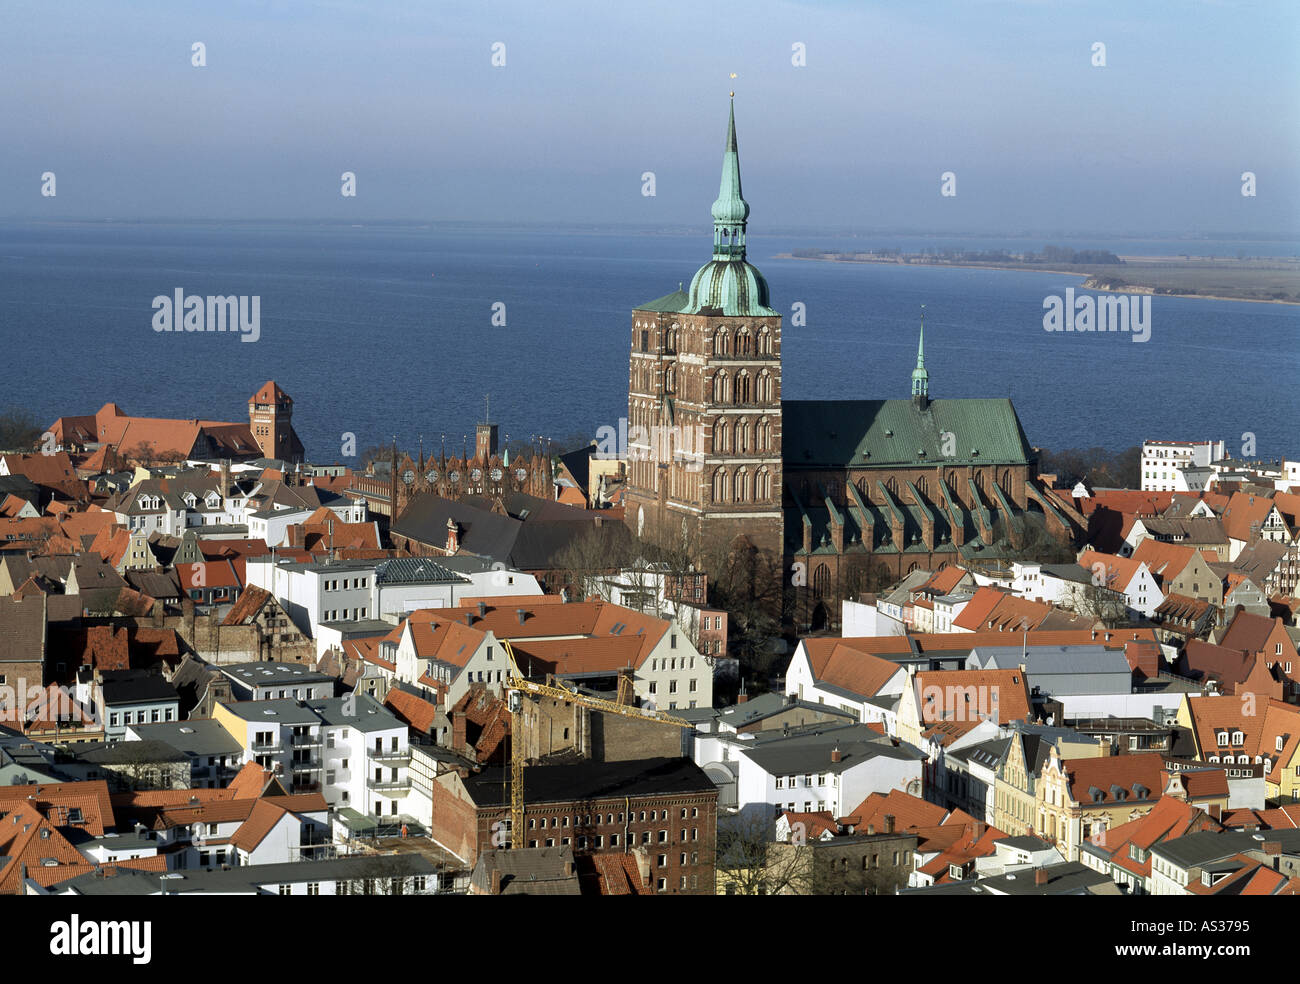 Page 5 - Altstadt Innenstadt High Resolution Stock Photography and Images -  Alamy